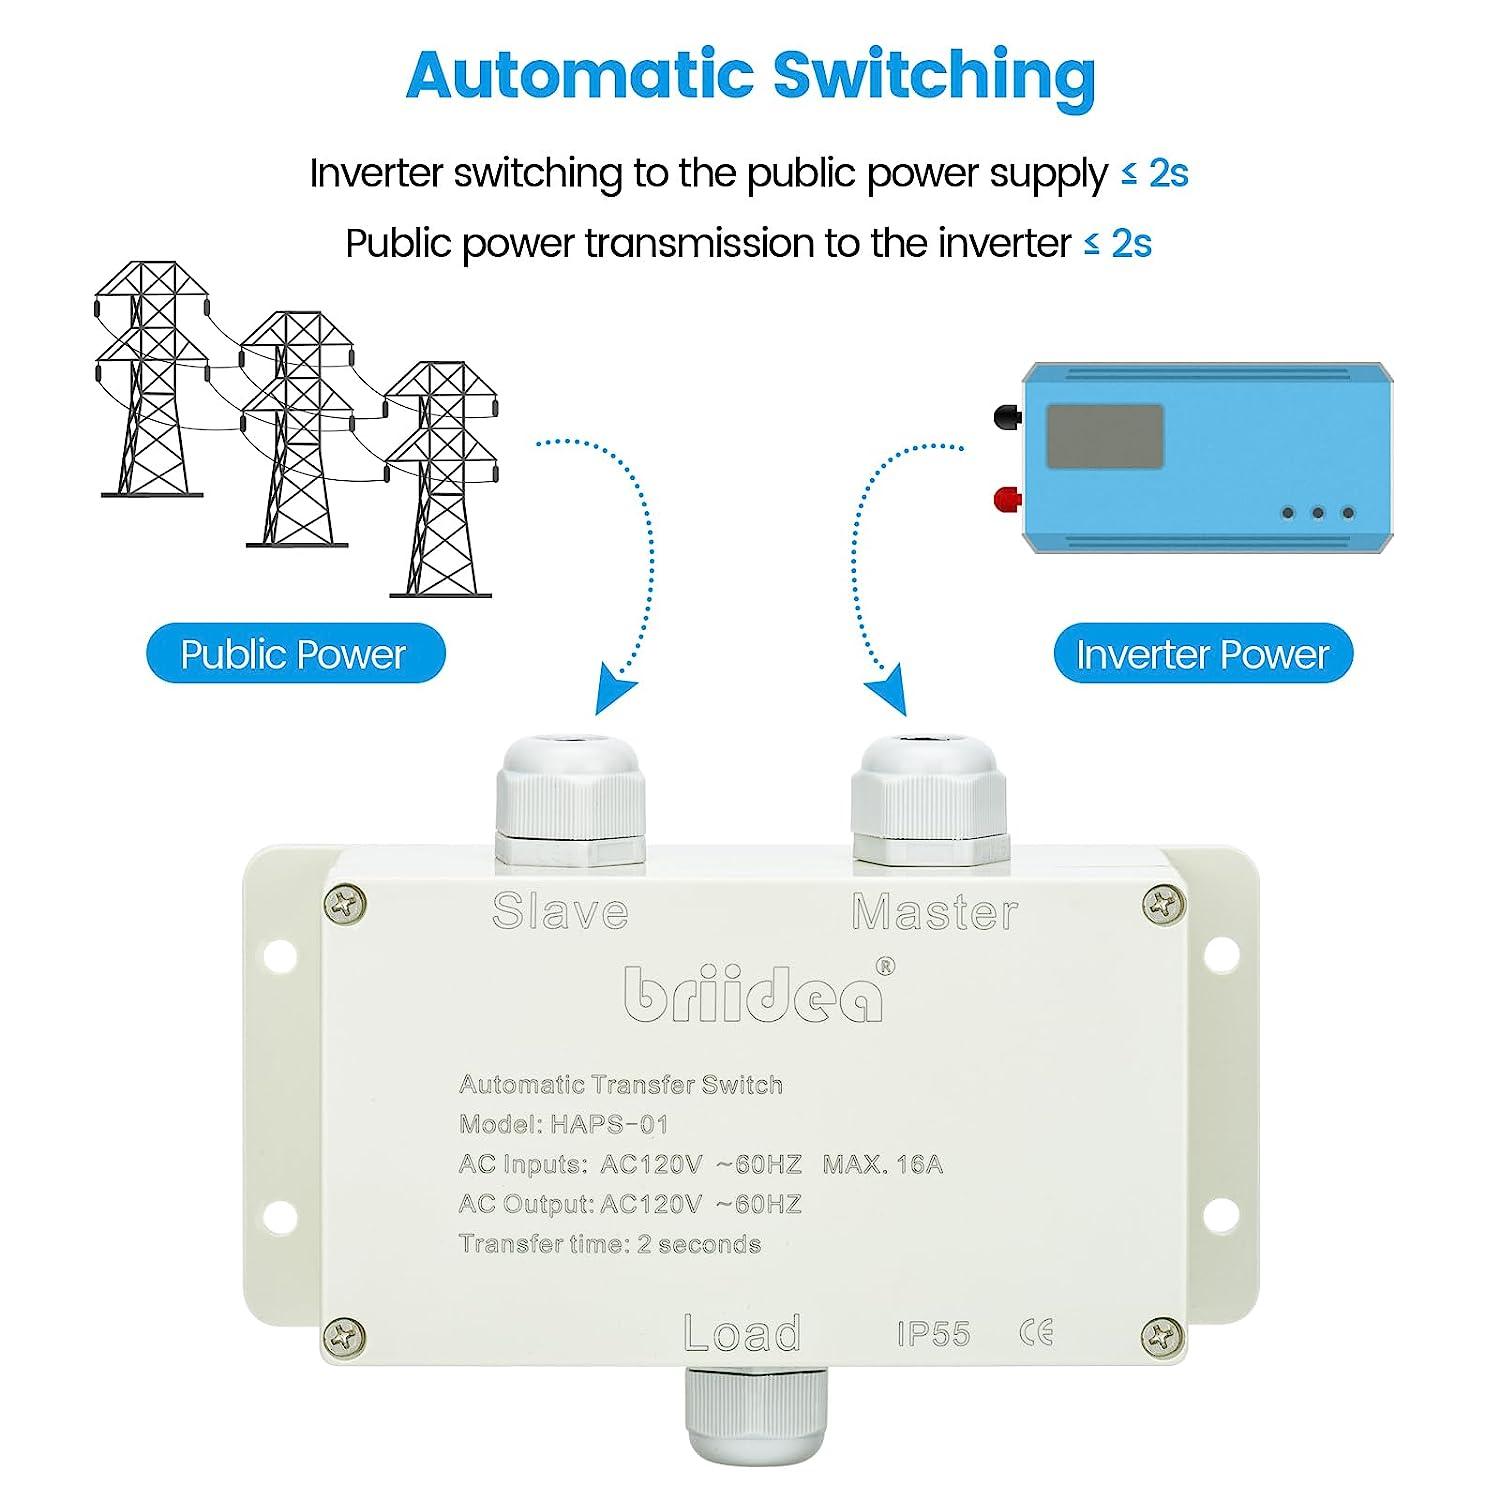 Automatic Transfer Switch, Briidea 120 VAC 16 AMP ATS Auto Transfer Switch for Inverter and Main Powers, UL Listed, Suitable for Use in Boats, RVs, Solar Power Systems, Motorhomes - briidea